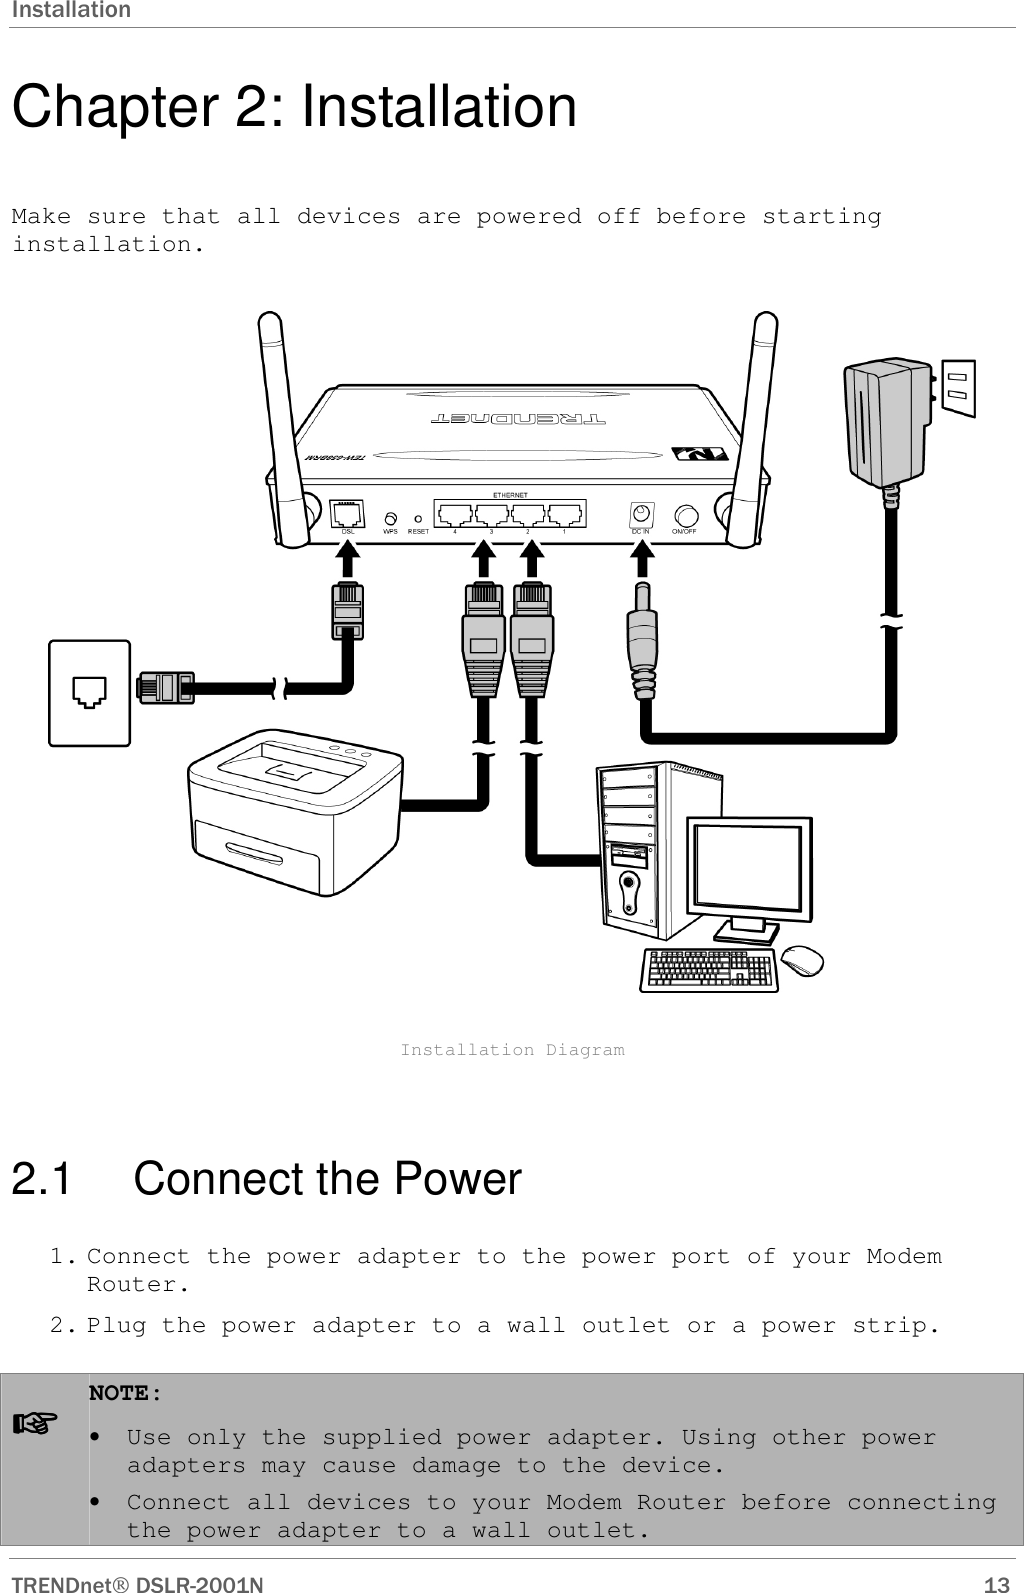 Installation  TRENDnet DSLR-2001N        13 Chapter 2: Installation Make sure that all devices are powered off before starting installation.    Installation Diagram  2.1  Connect the Power 1. Connect the power adapter to the power port of your Modem Router. 2. Plug the power adapter to a wall outlet or a power strip.  ☞☞☞☞ NOTE:  • Use only the supplied power adapter. Using other power adapters may cause damage to the device.  • Connect all devices to your Modem Router before connecting the power adapter to a wall outlet. 